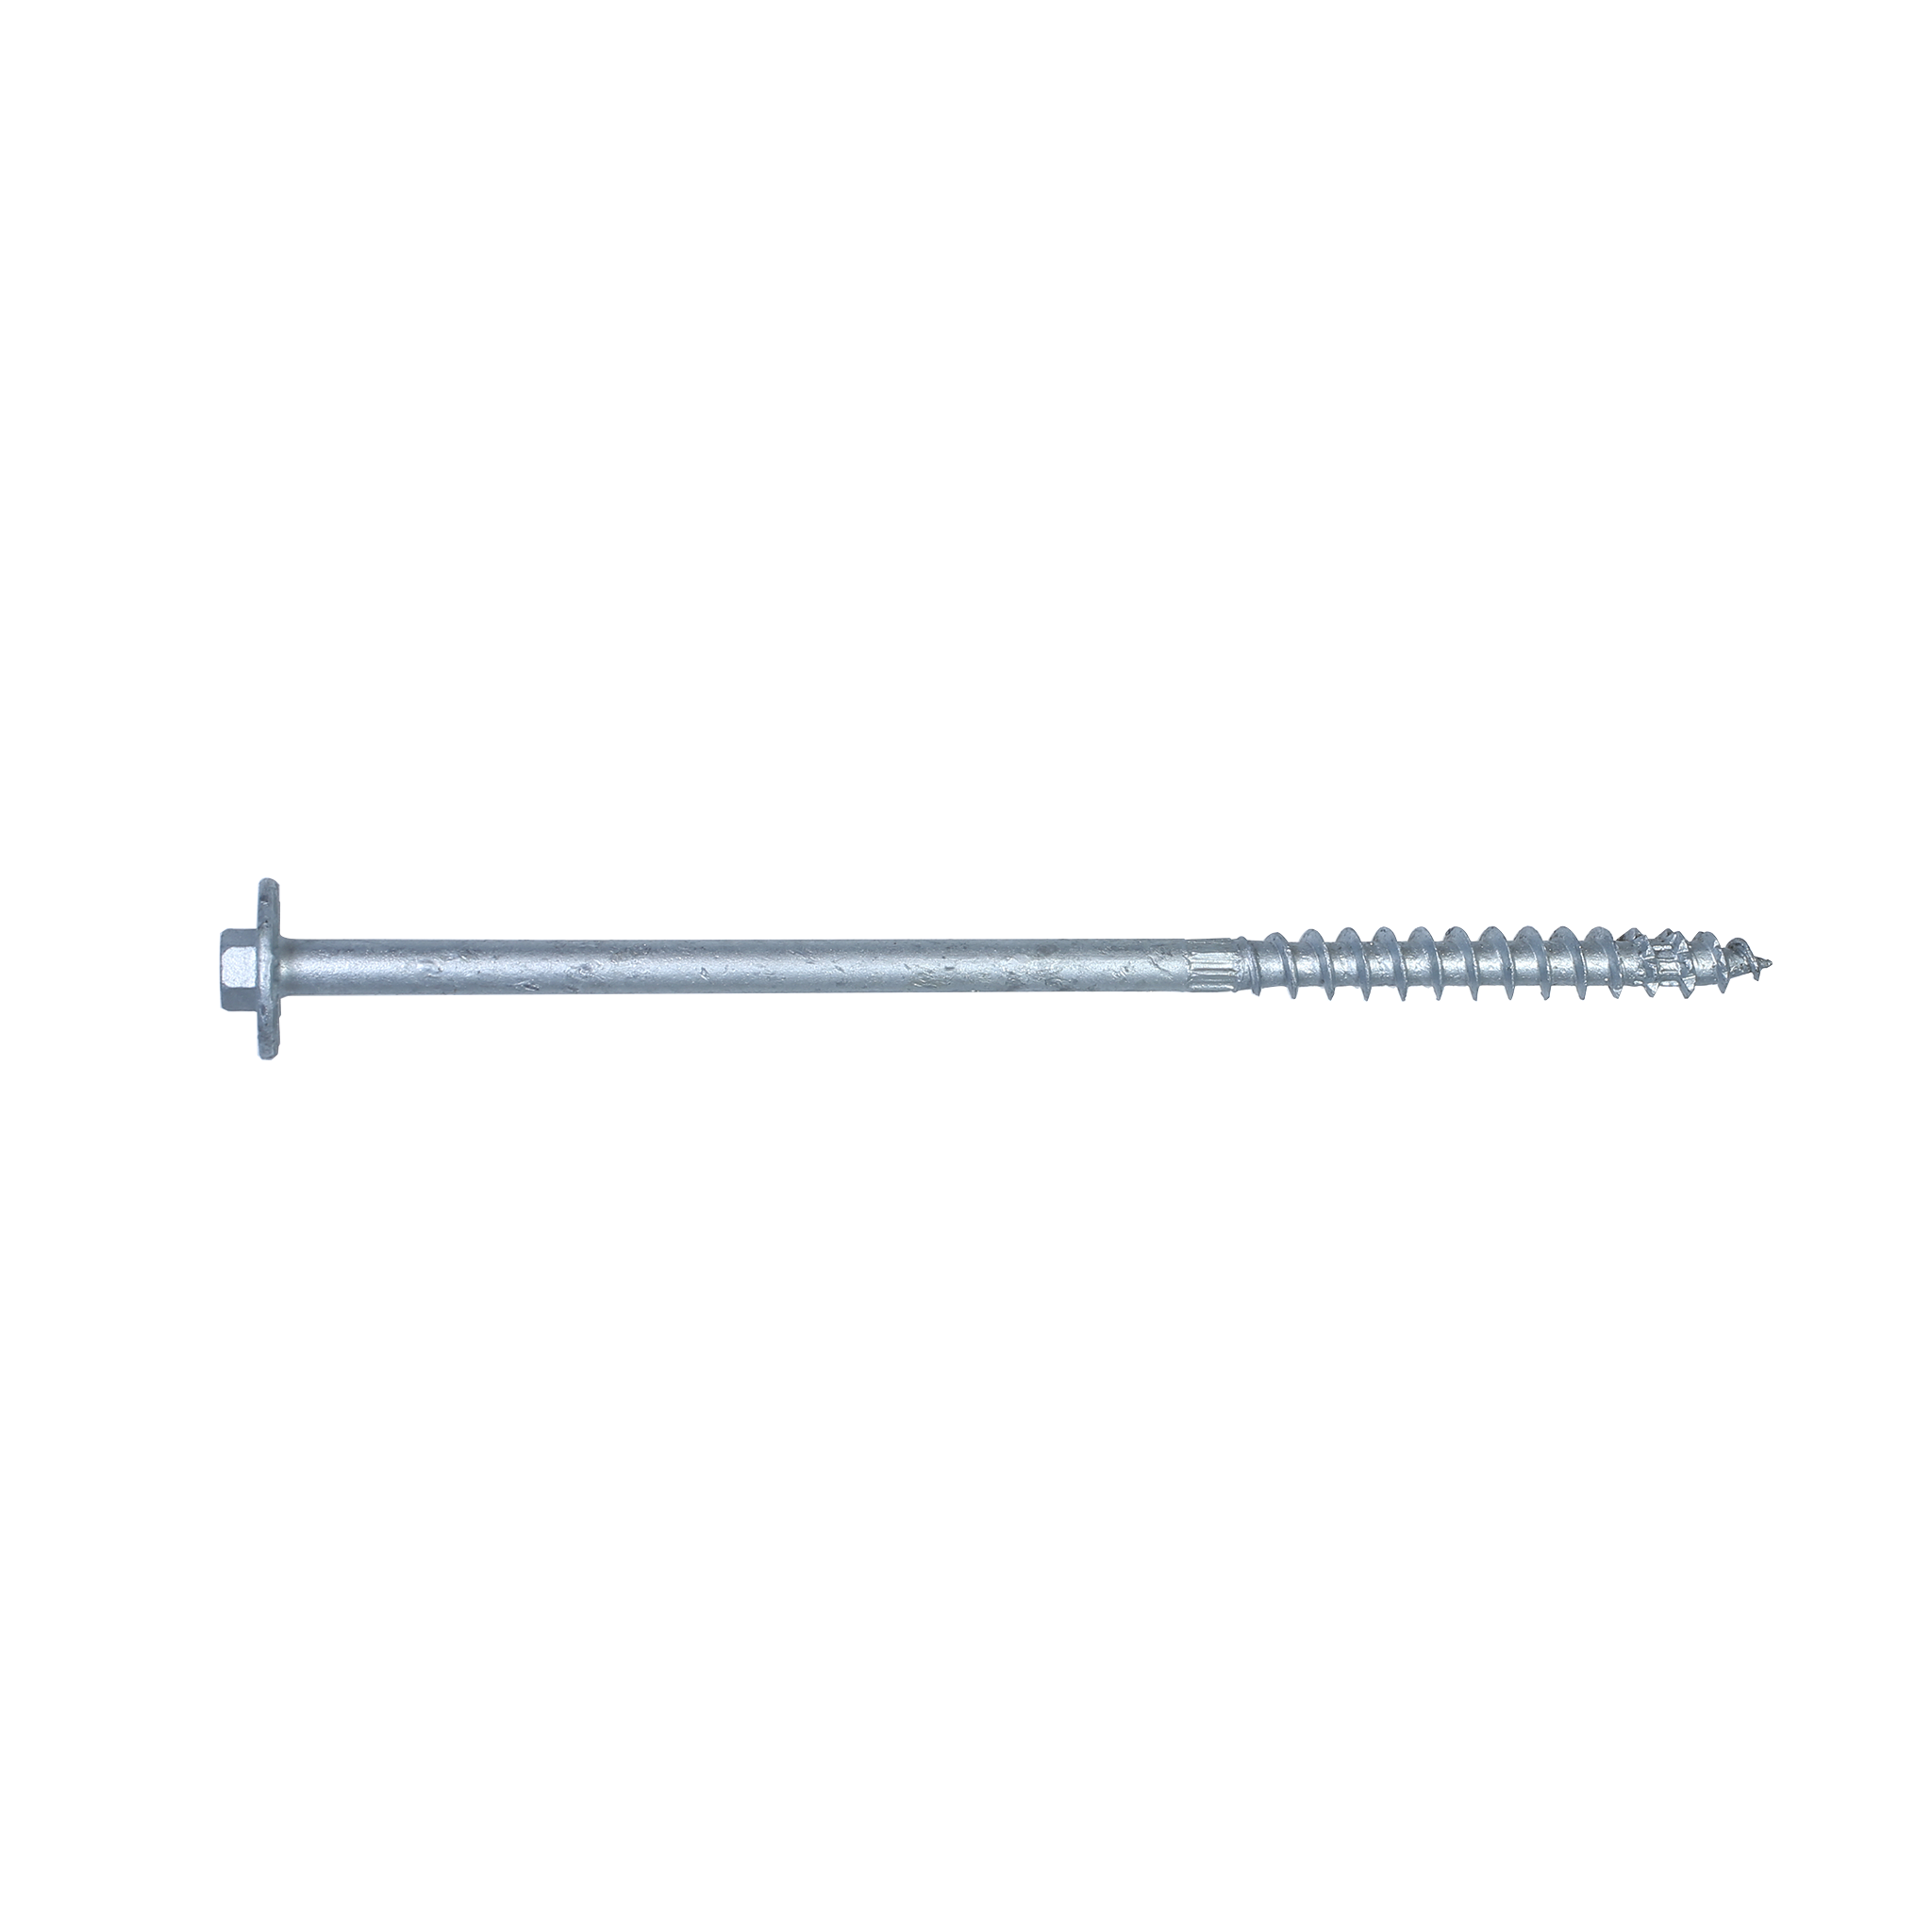 Strong-Drive® SDWH TIMBER-HEX HDG Screw — 0.276 in. x 8 in. 3/8 Hex (150-Qty)